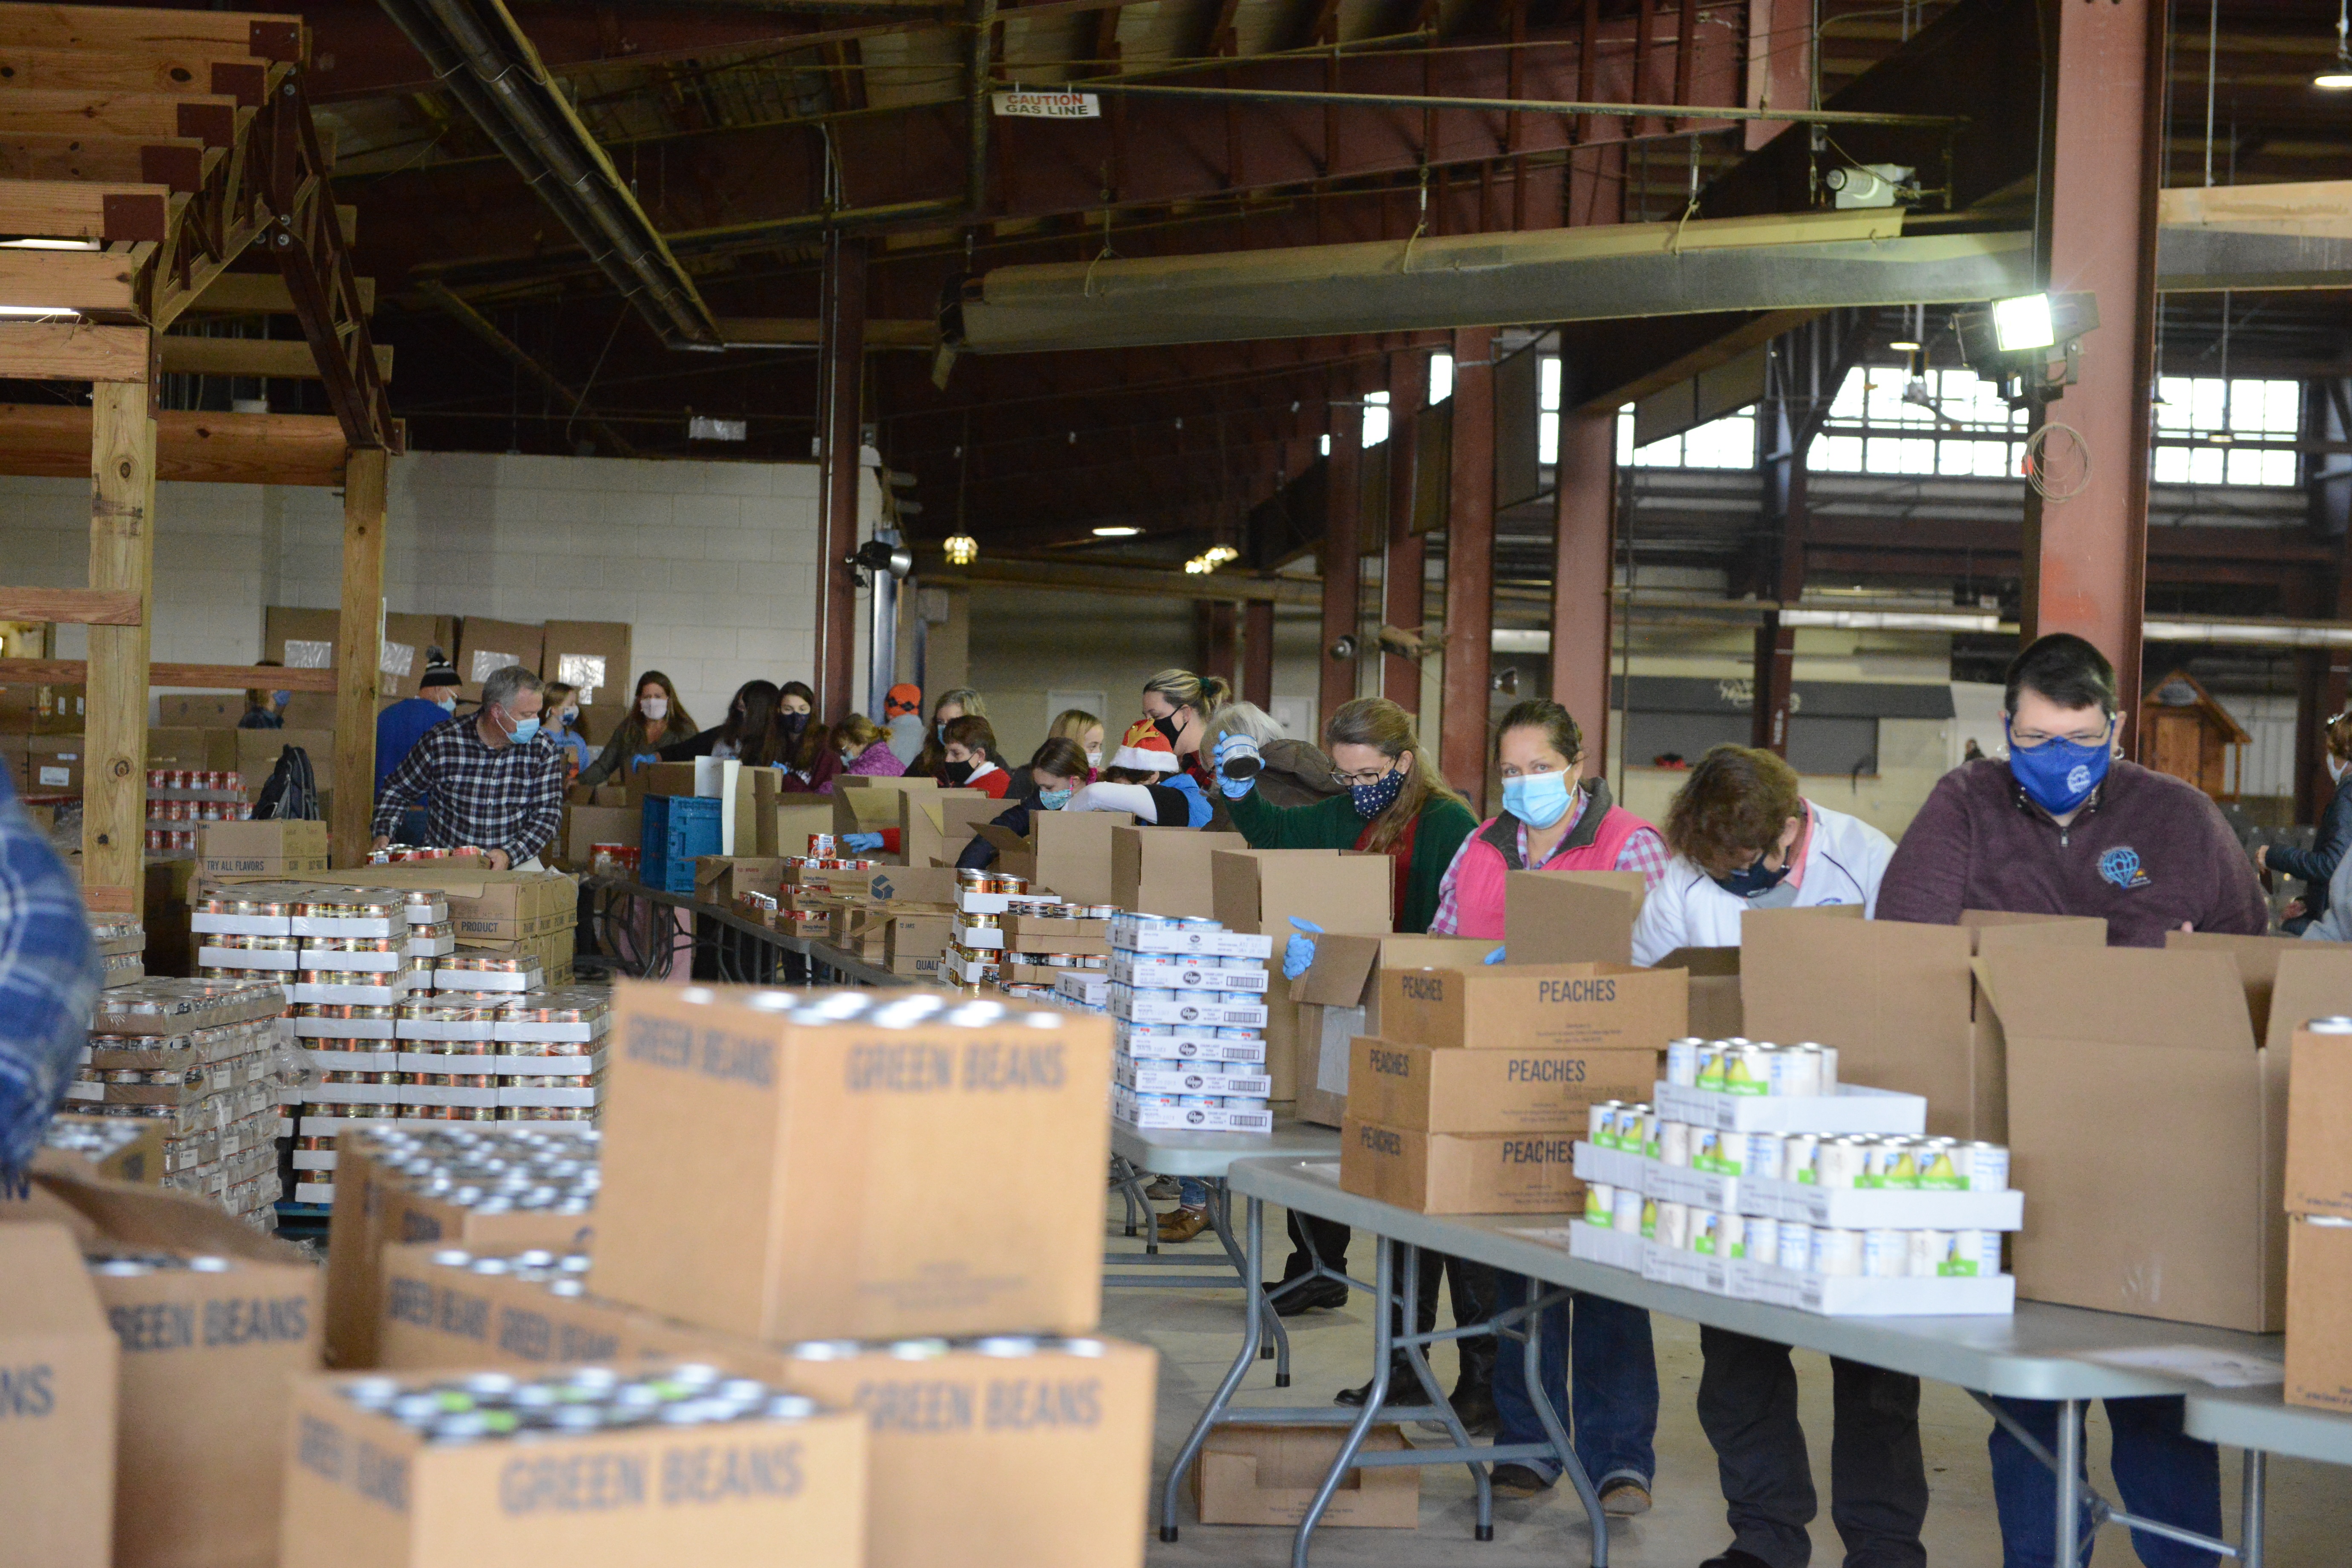 Long line of volunteers, all wearing masks, busy packing boxes with canned food items.